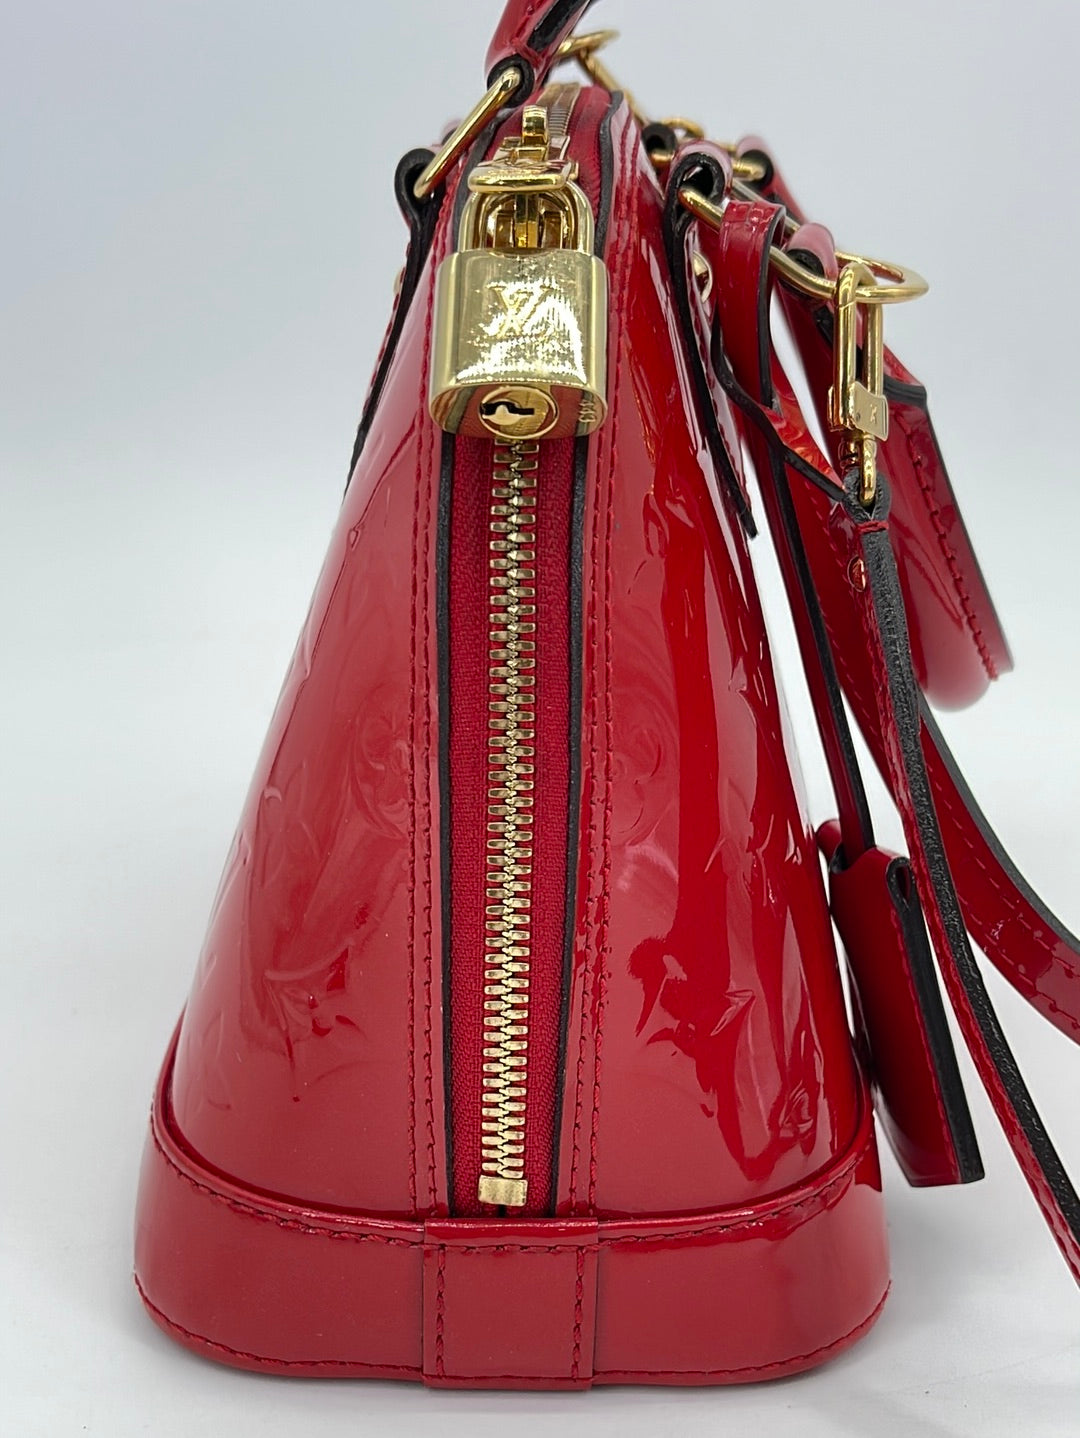 LOUIS VUITTON Red Monogram Vernis Leather Alma BB For Sale at